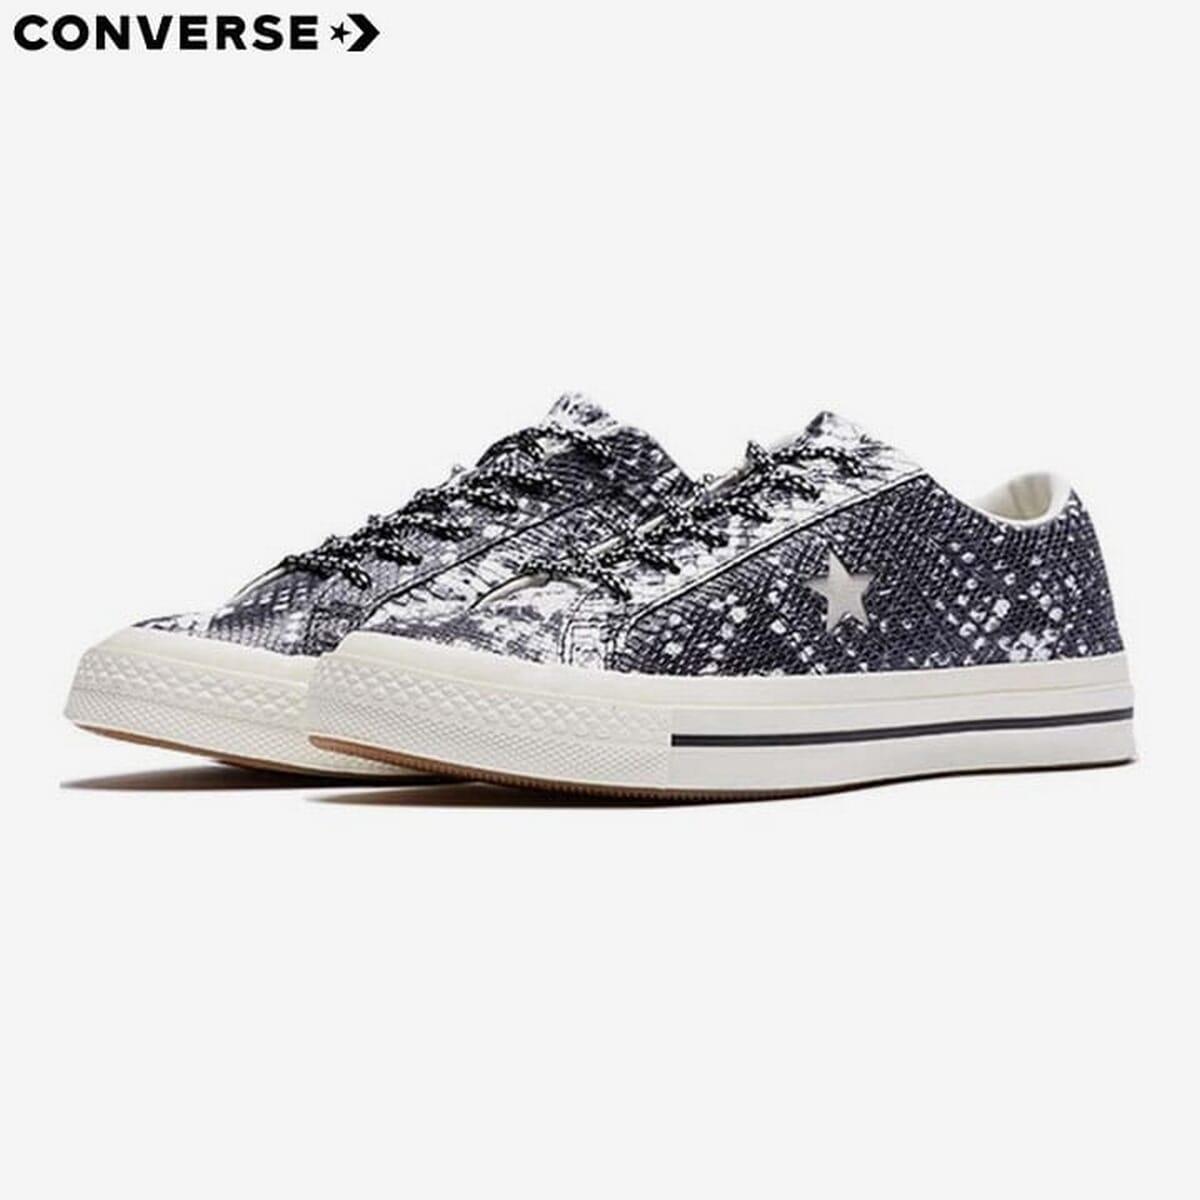 converse one star snake suede sneakers for unisex 161546c